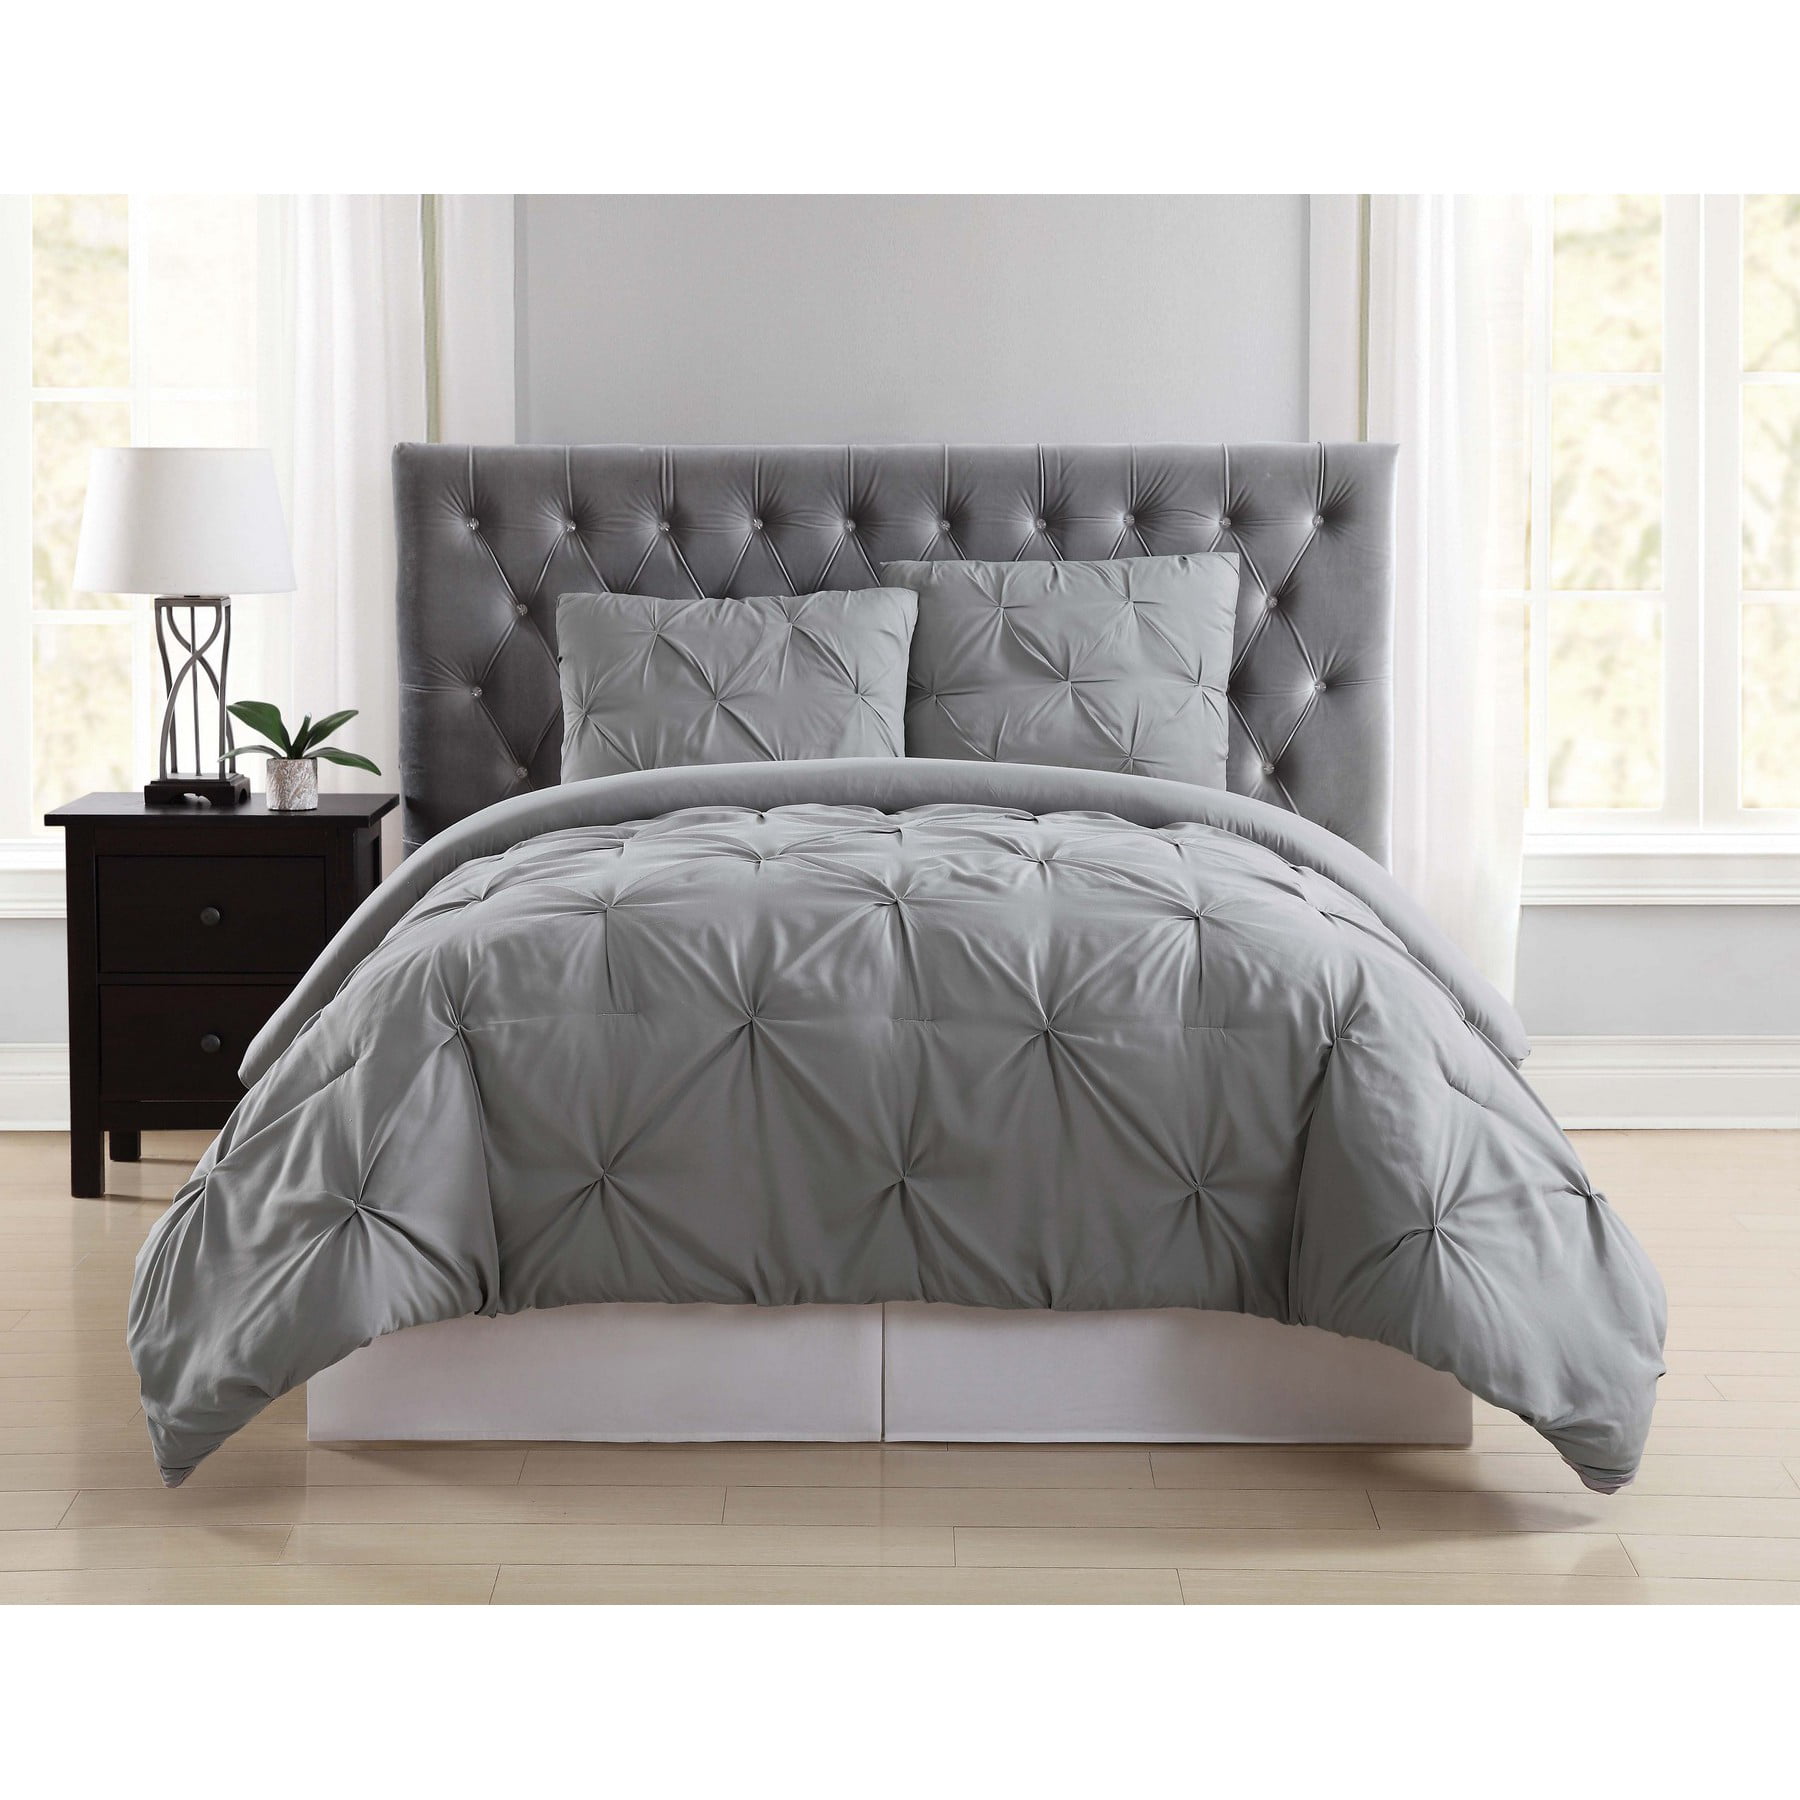 twin xl comforter size